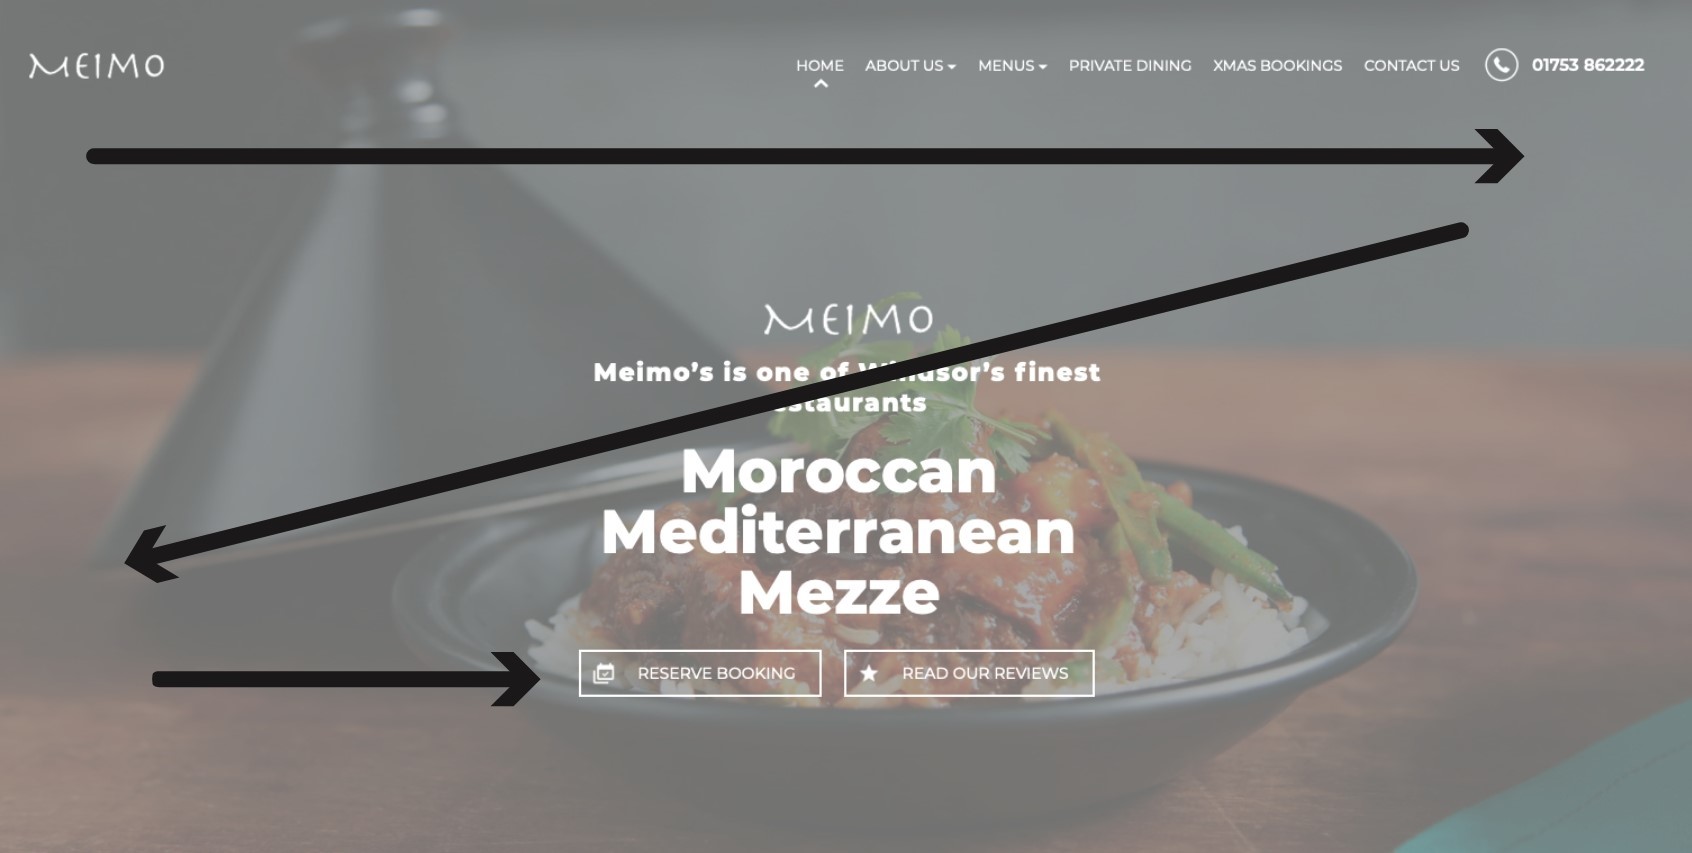 Meimo Morrocan Mediterranean Mezze website screenshot with arrows pointing out specific parts